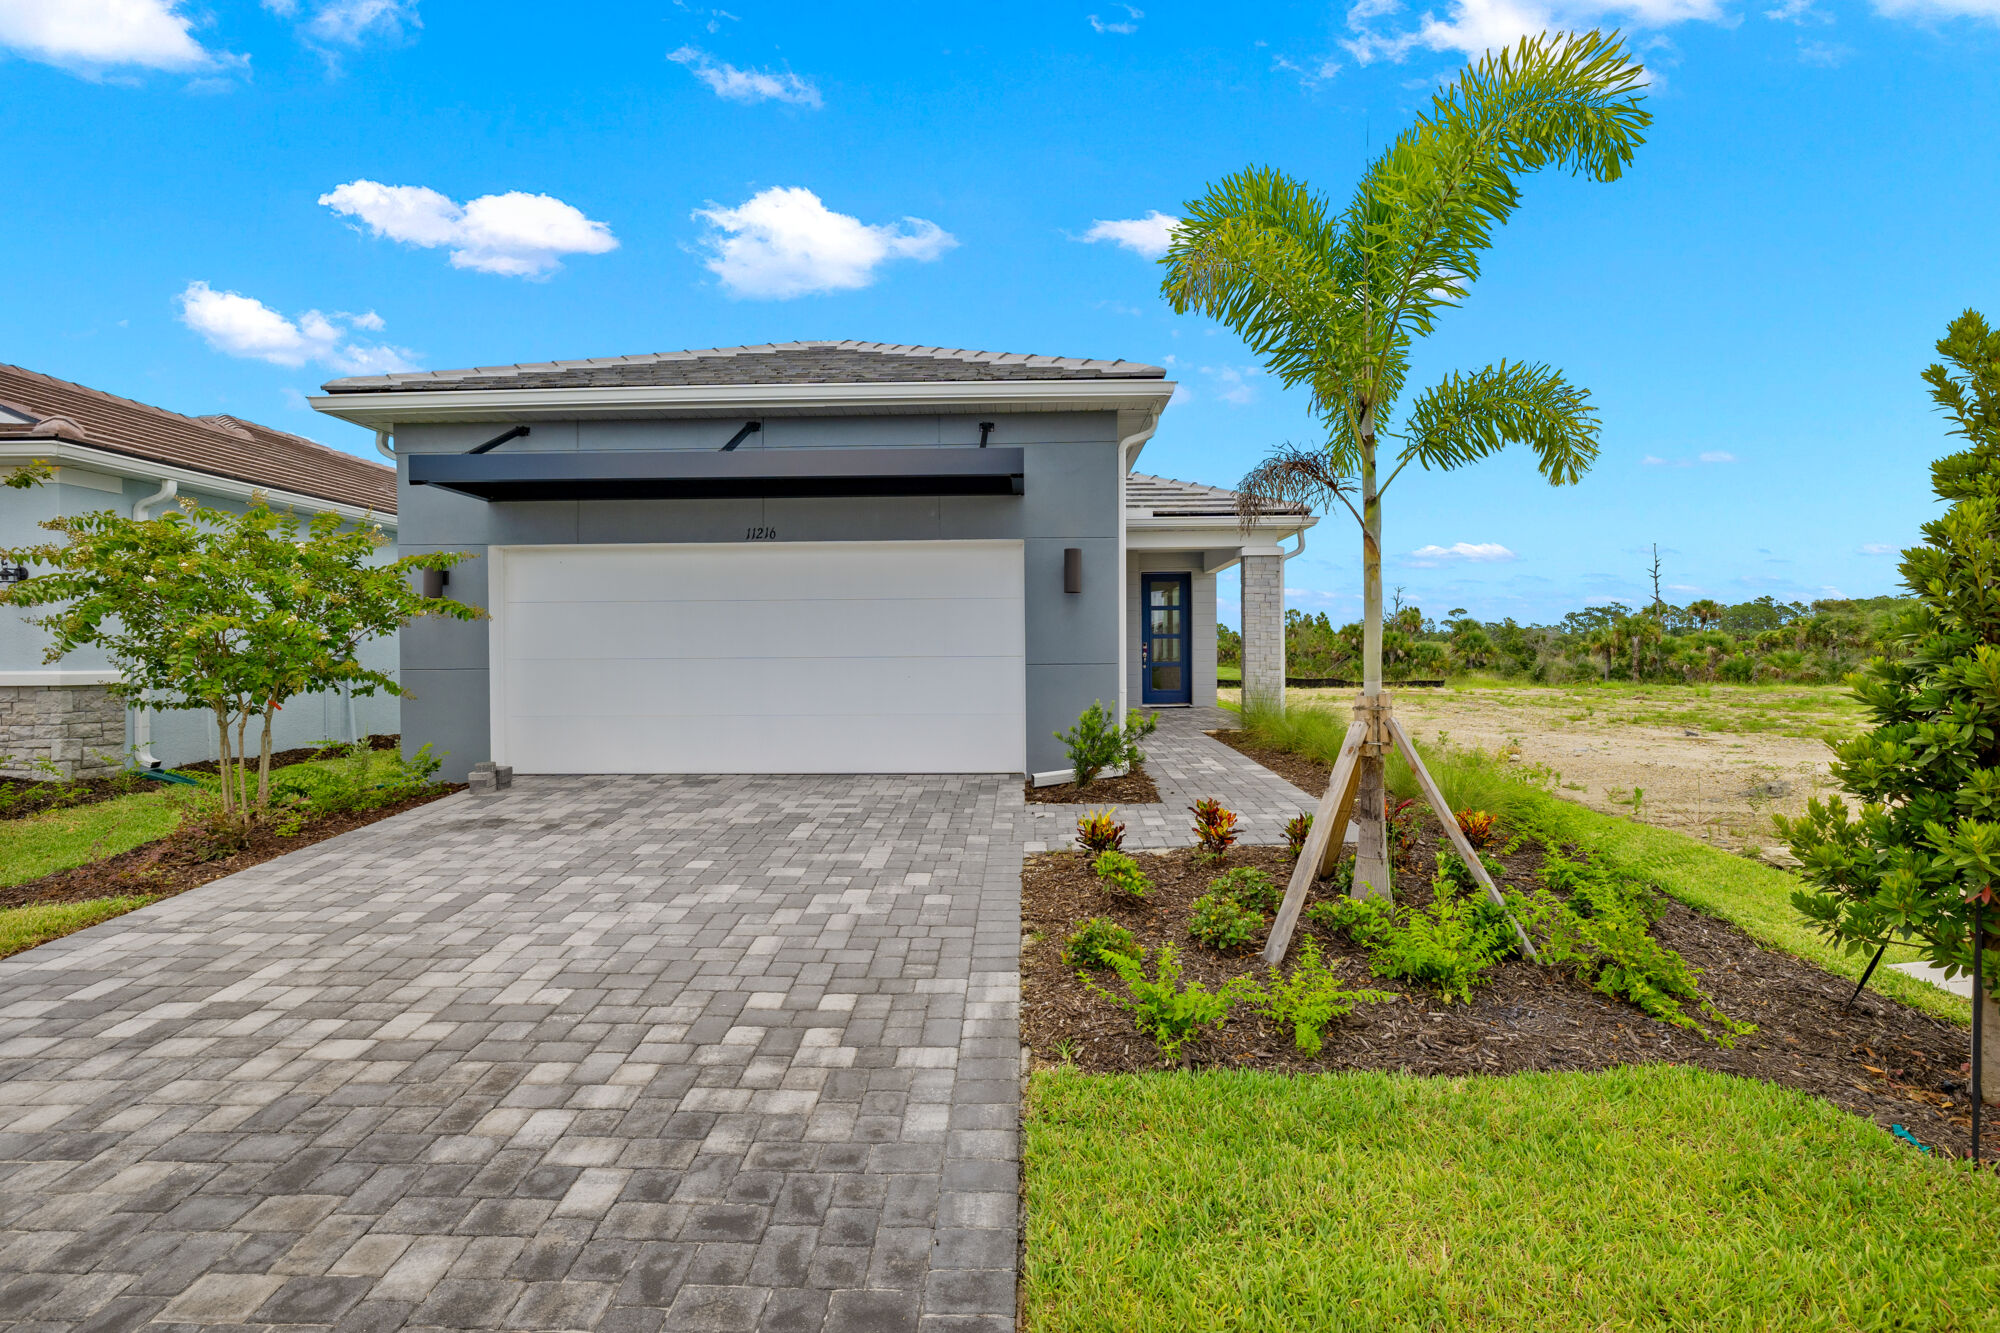 2 bedrooms, 2 bath, study, 2 car extended garage, open concept plan with oversized sliders from great room to covered lanai. Split bedroom plan, laundry room, oversized owner's shower, walk-in closet and dual sink raised vanity. 